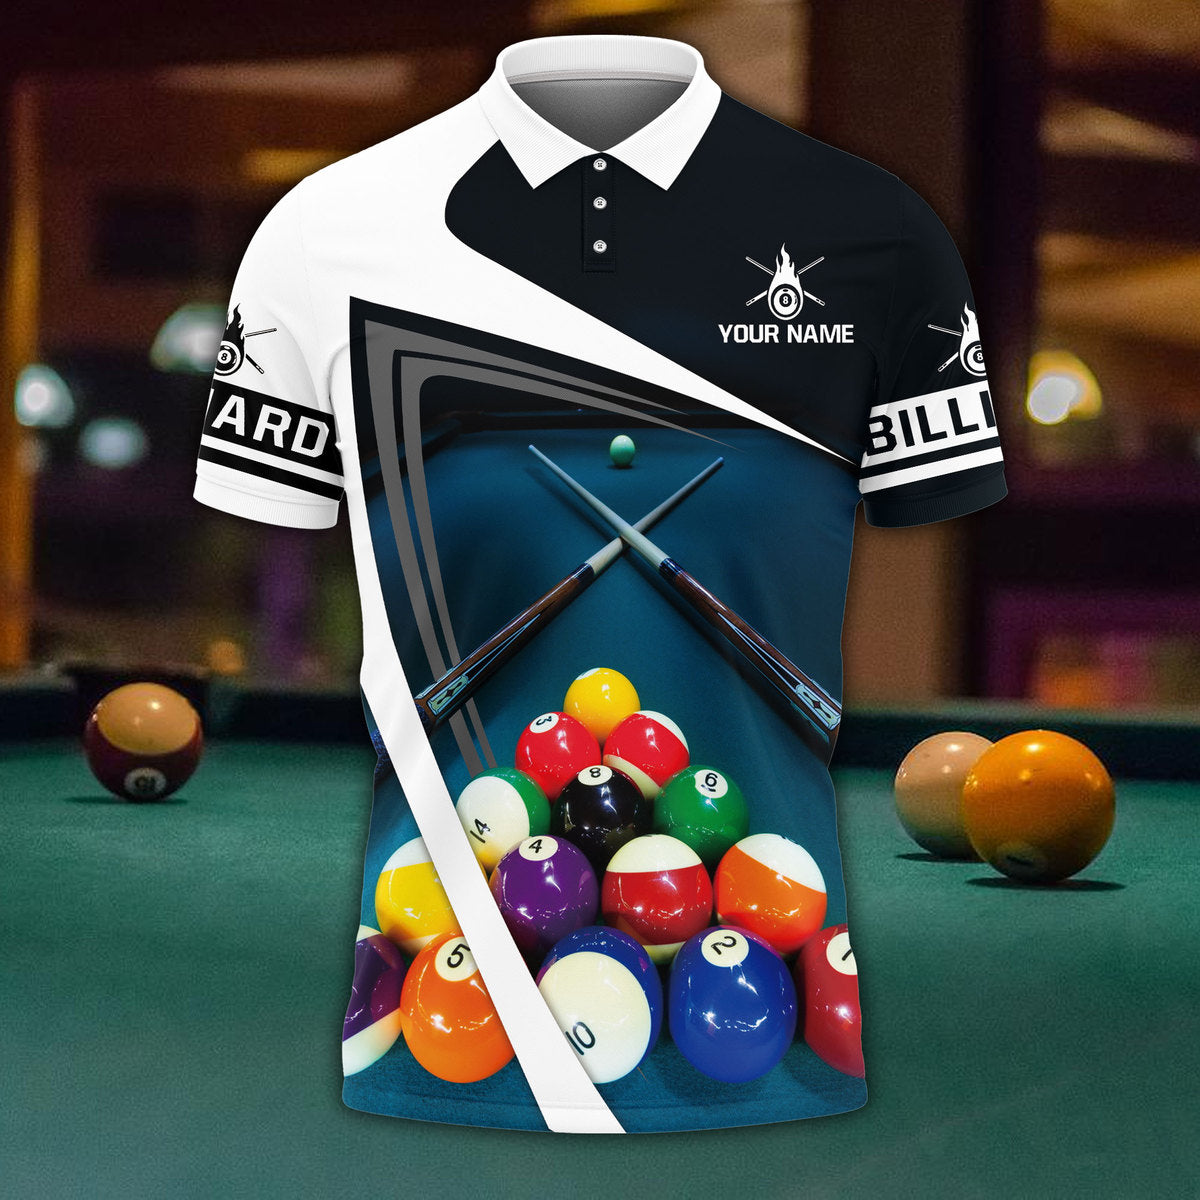 Personalized Name Billiard Polo Shirt Men Women/ Billiard 3D Shirt/ Billiard Team Uniform/ Billiard Lover Gift